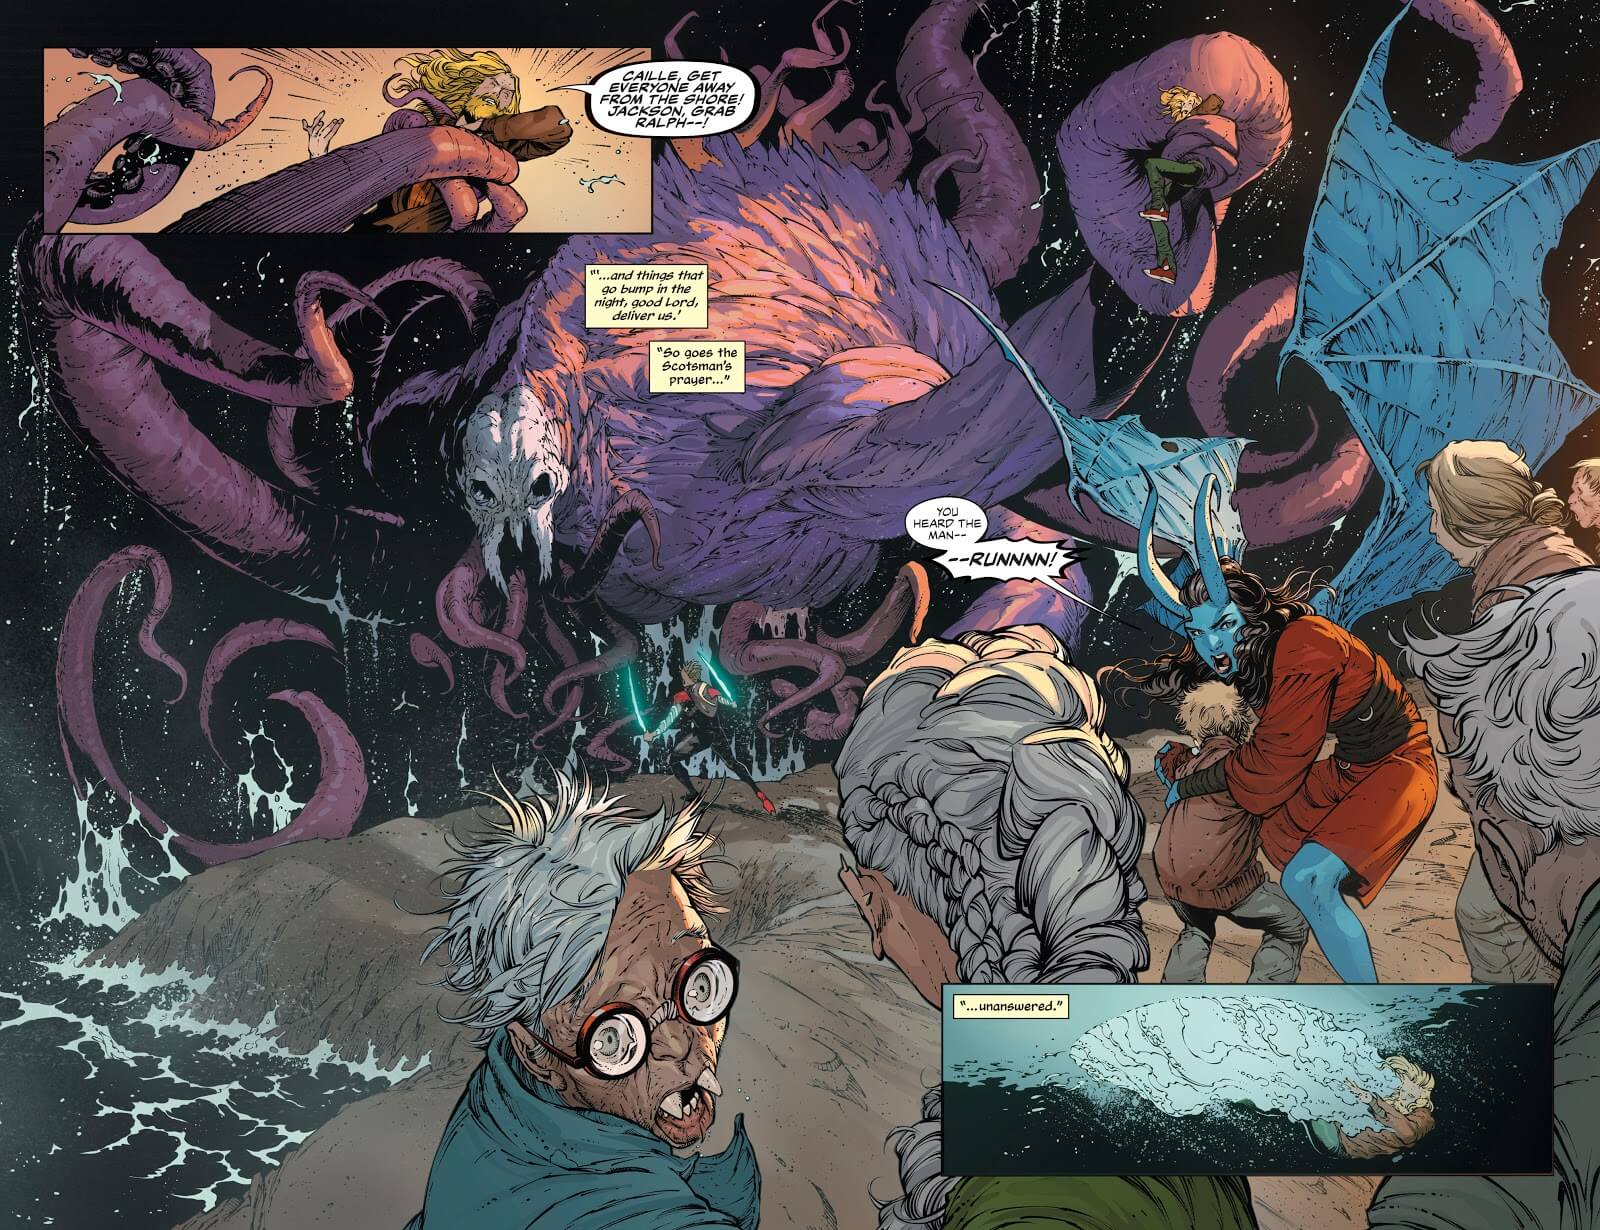 Double-page spread from Aquaman #52, showing a beach being terrorised by a Cthulhu-like monster.